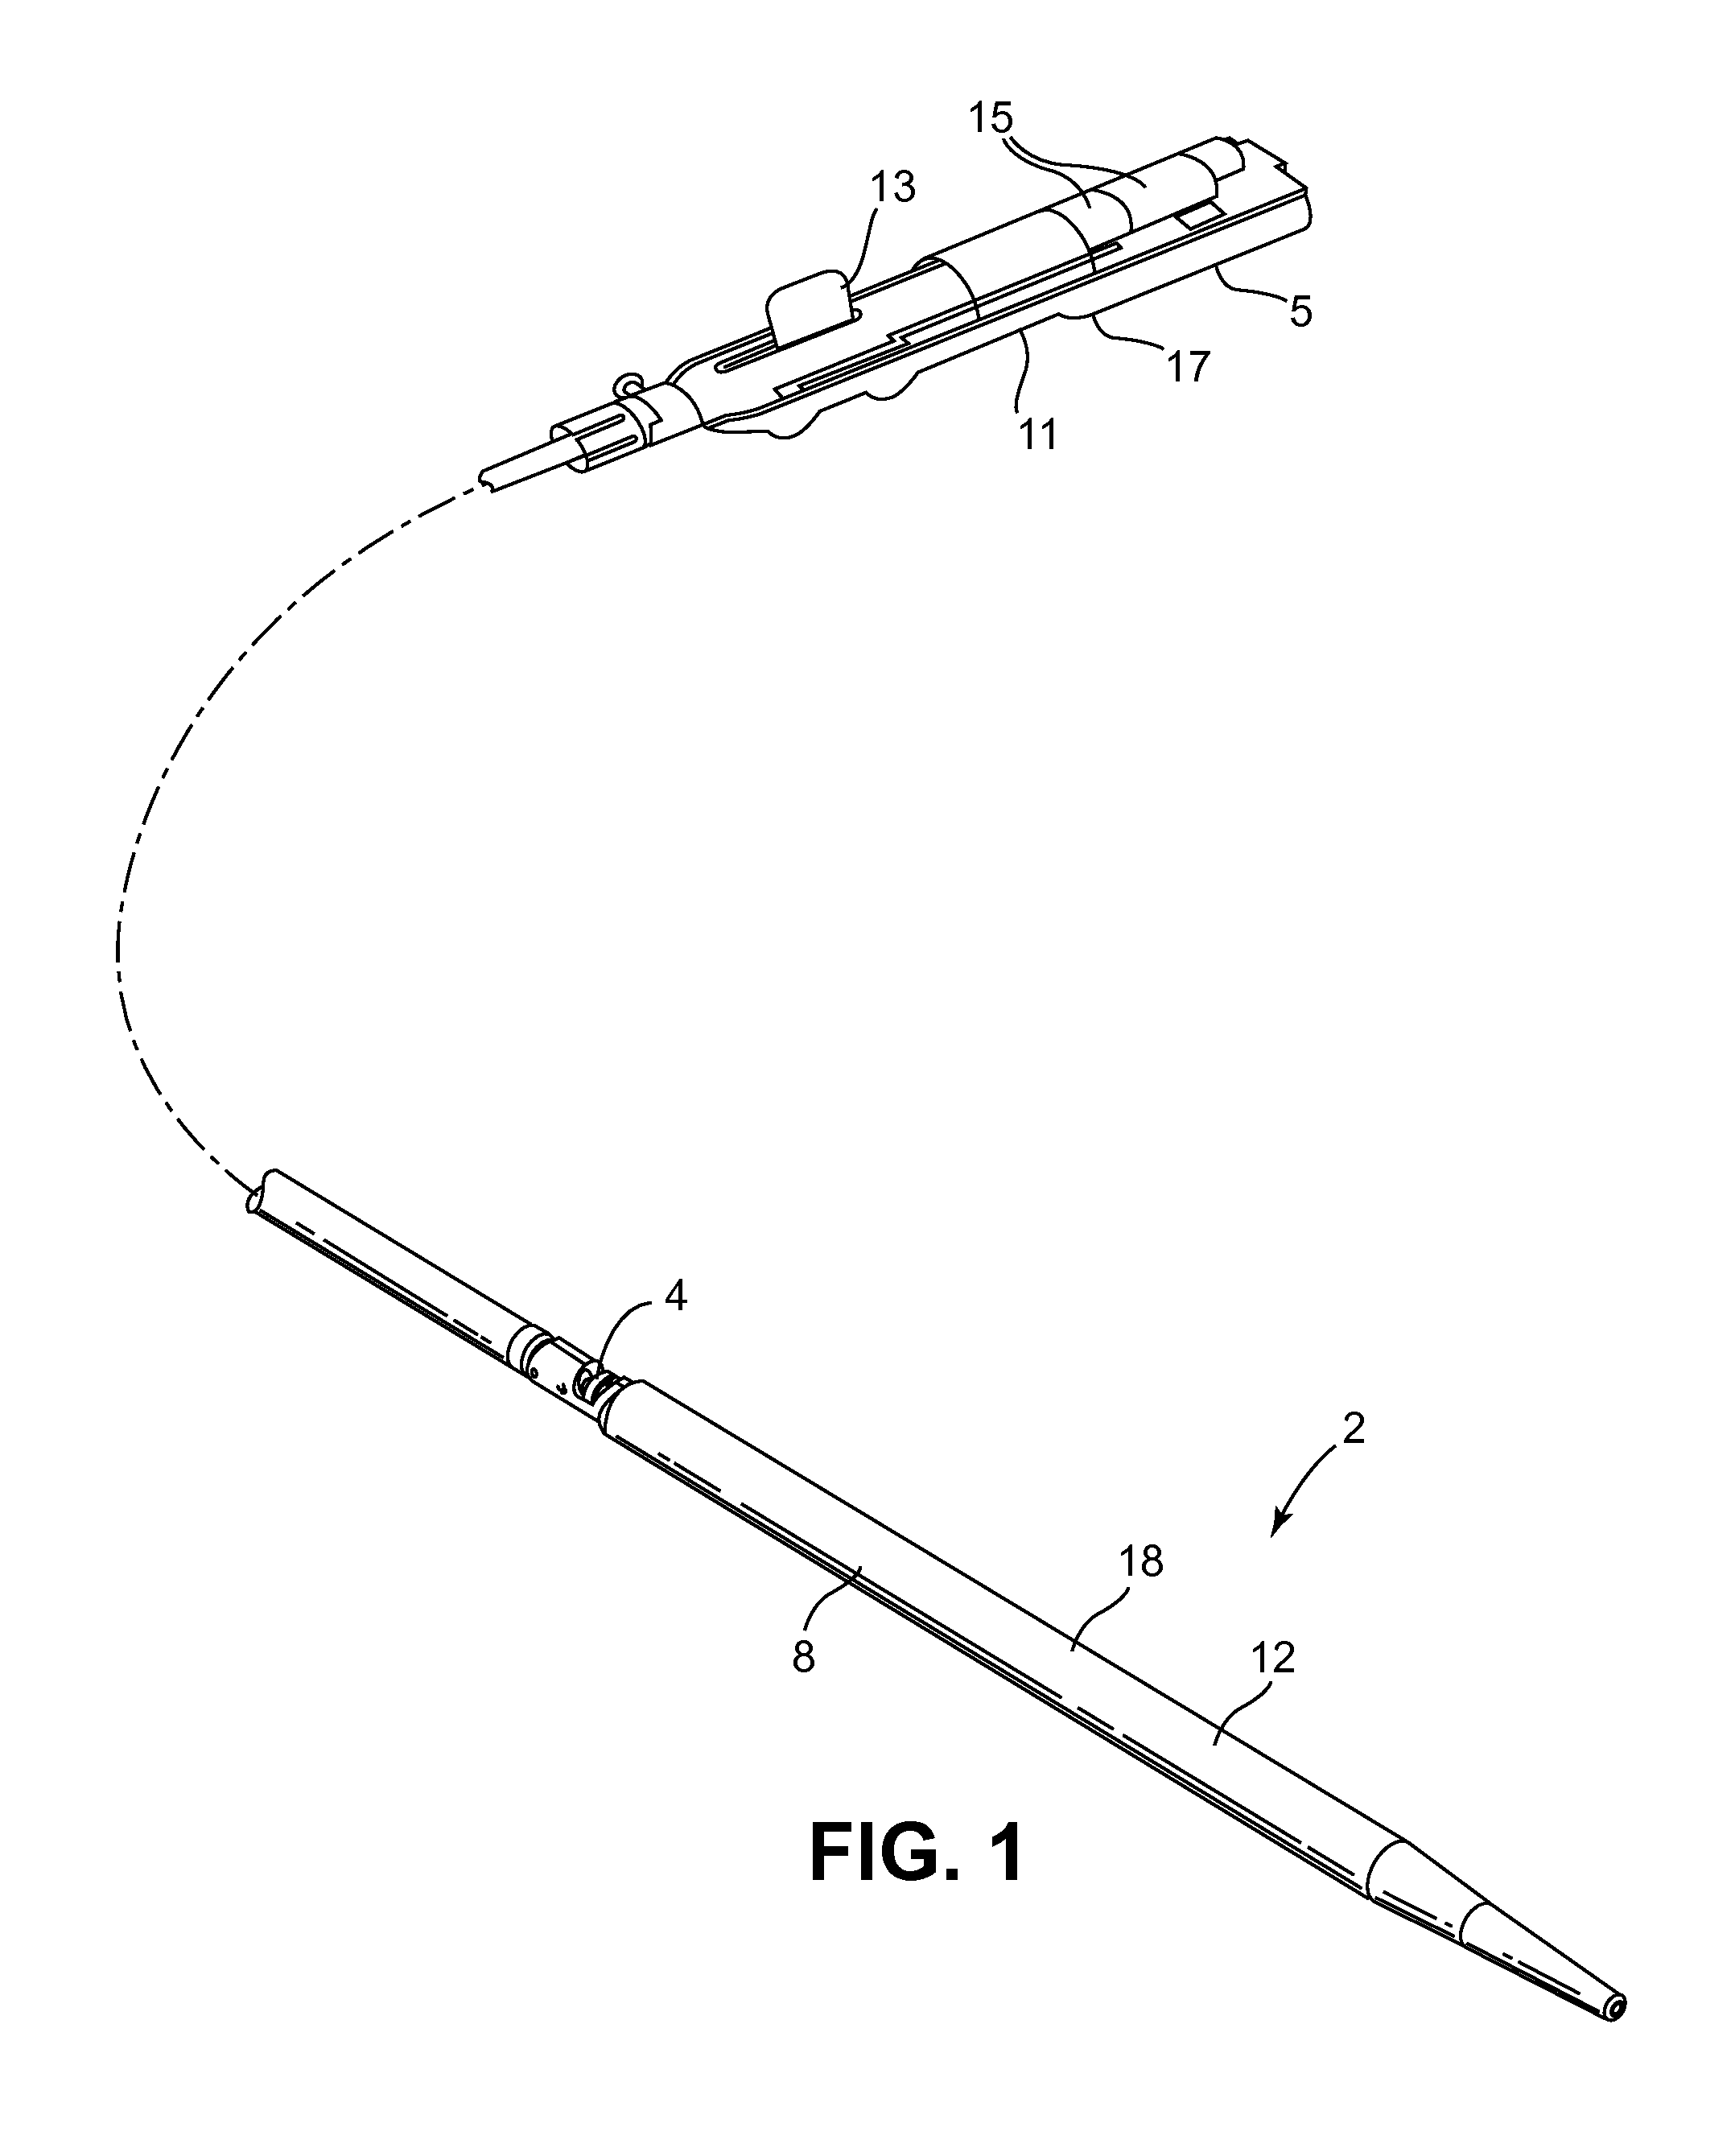 Methods and devices for cutting and abrading tissue